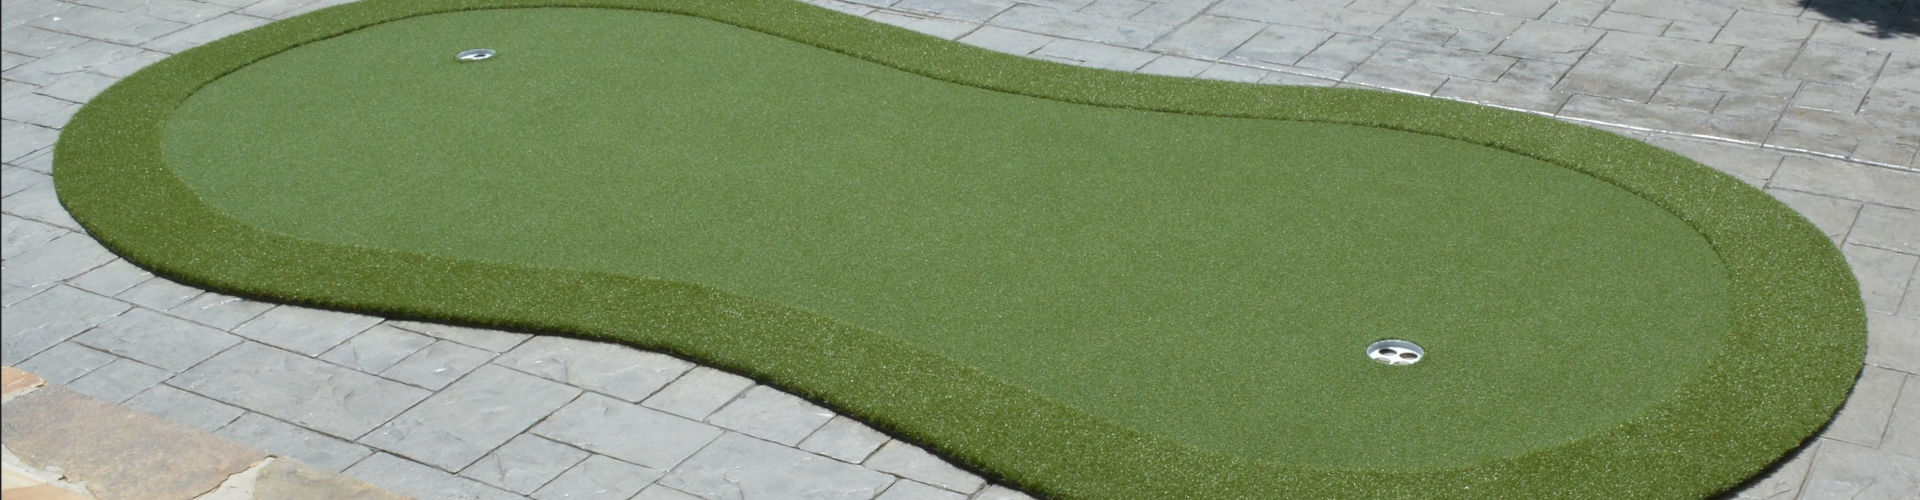 Southwest Greens Pittsburgh Portable Putting Green